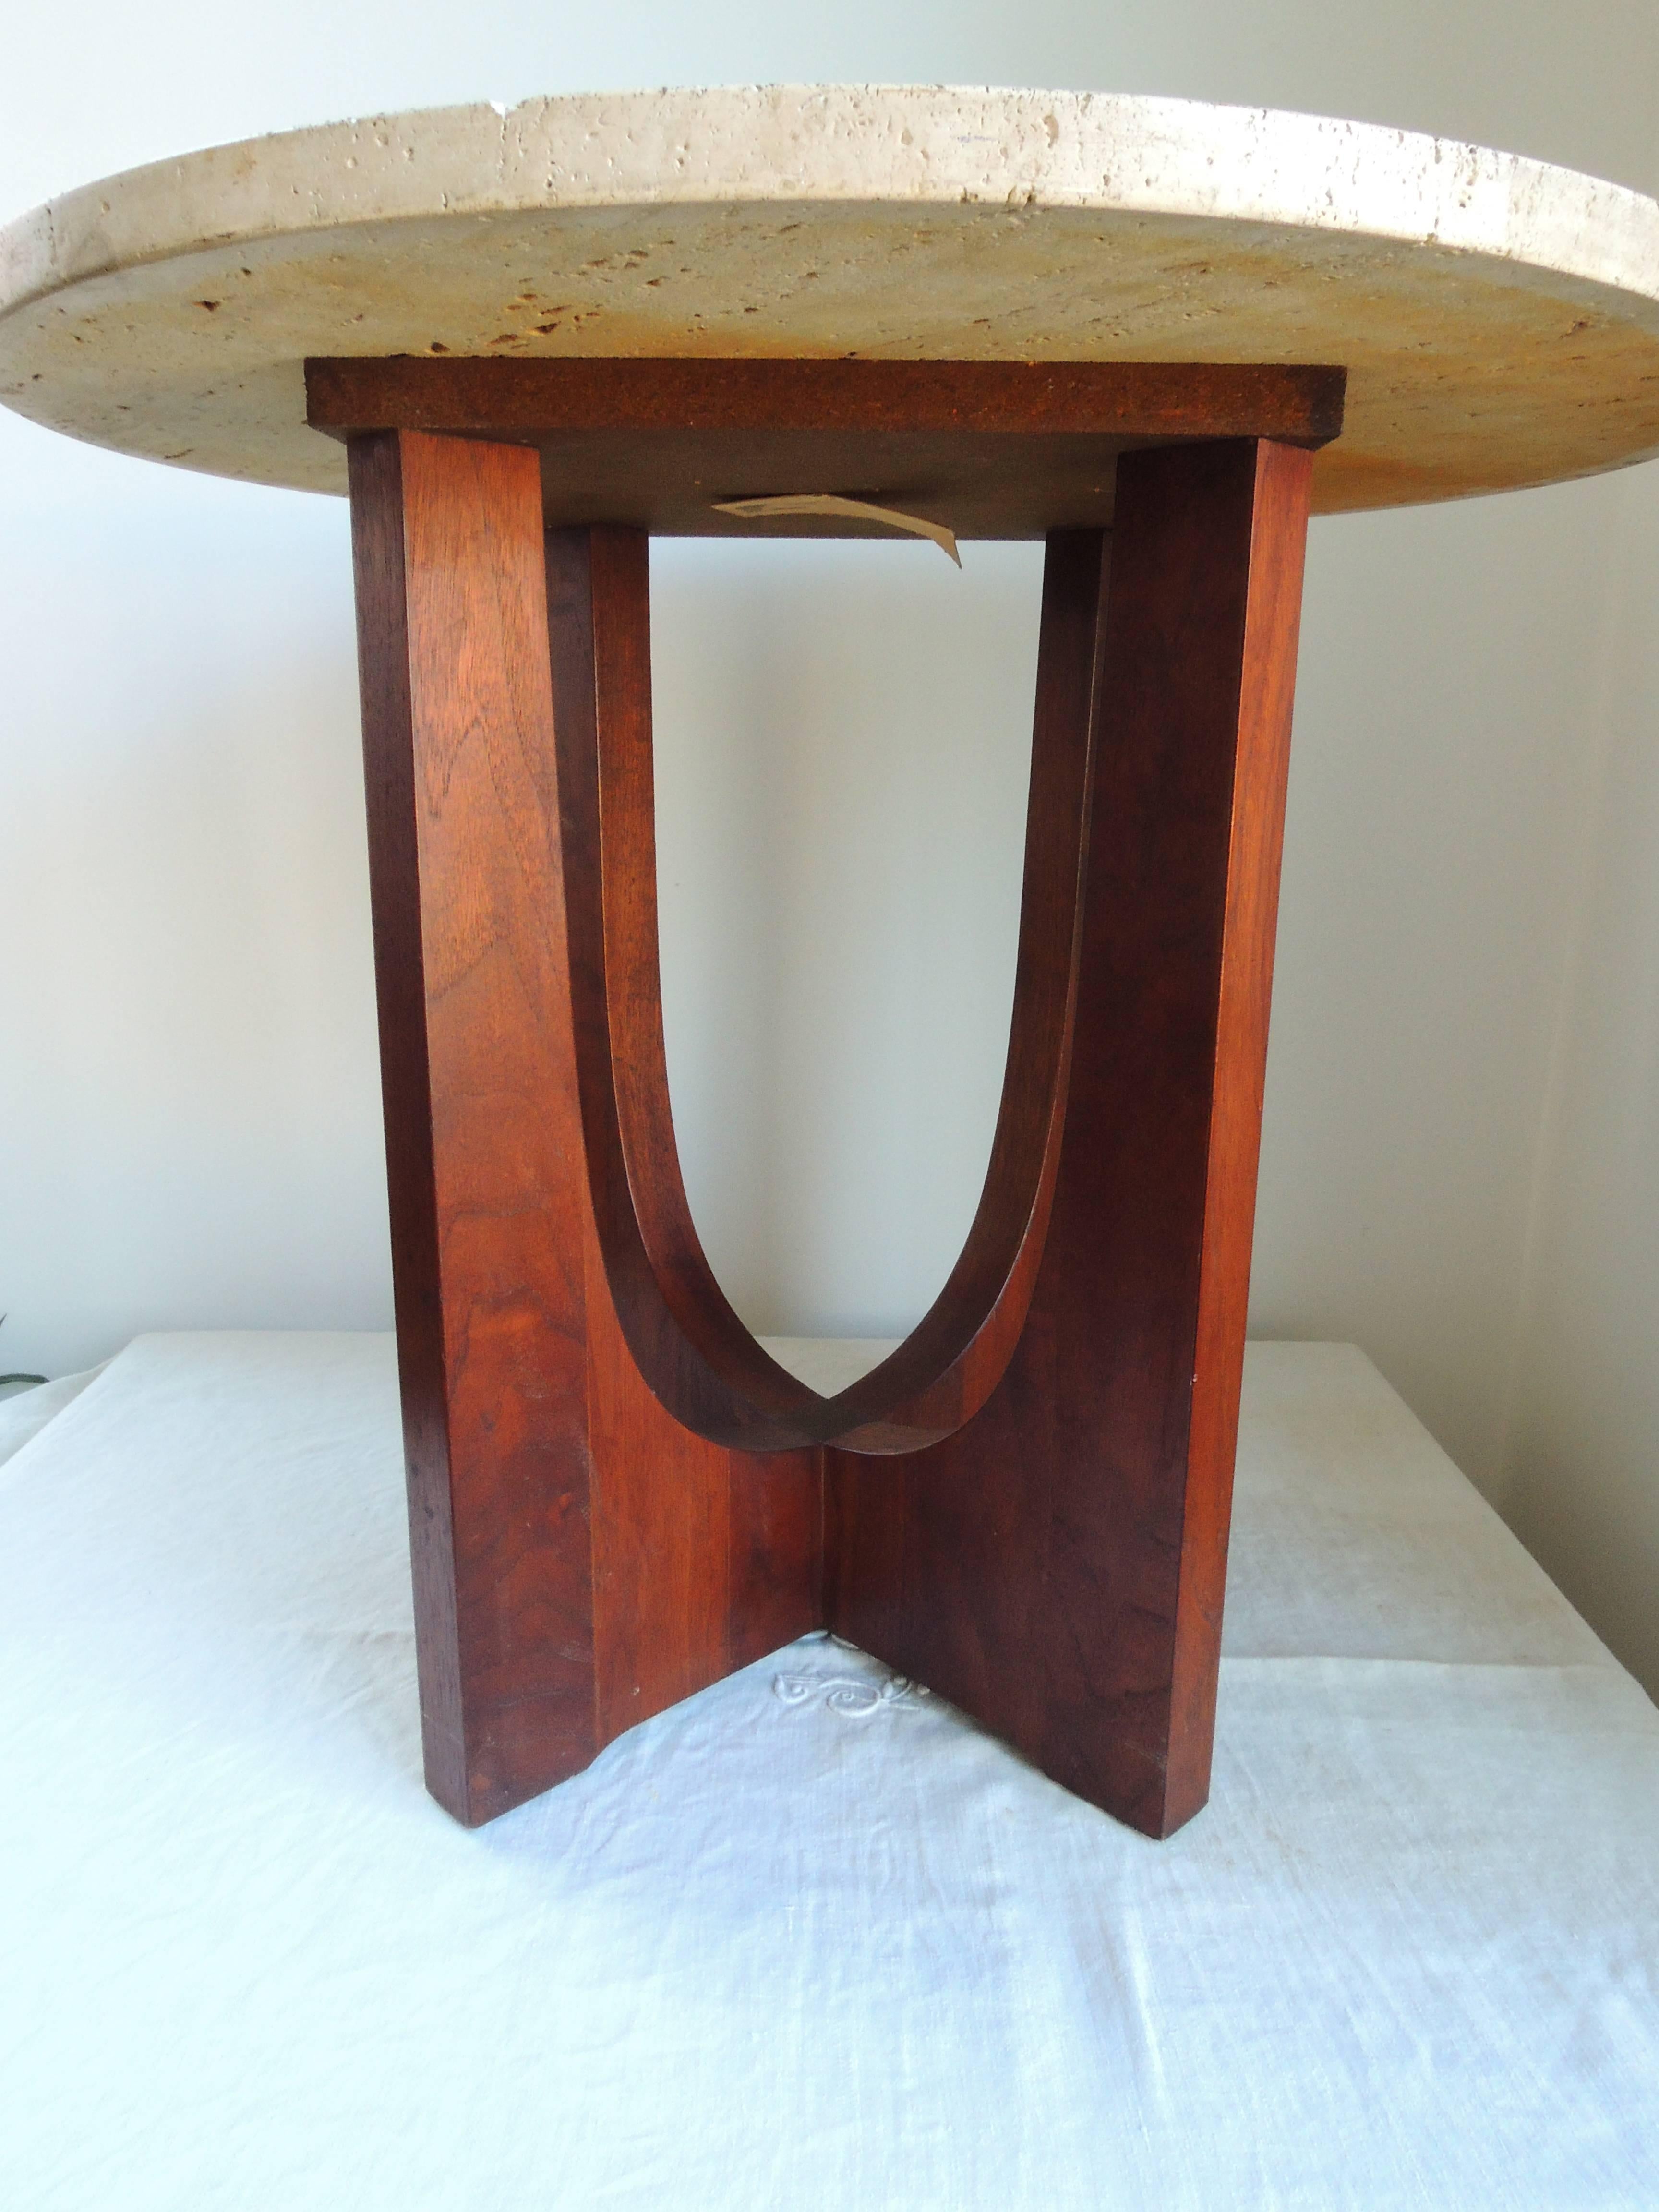 A midcentury interpretation of a deco gueridon. Attributed to Pier Luigi Colli.
Note the detail of the slight definition creating the feet of the table.